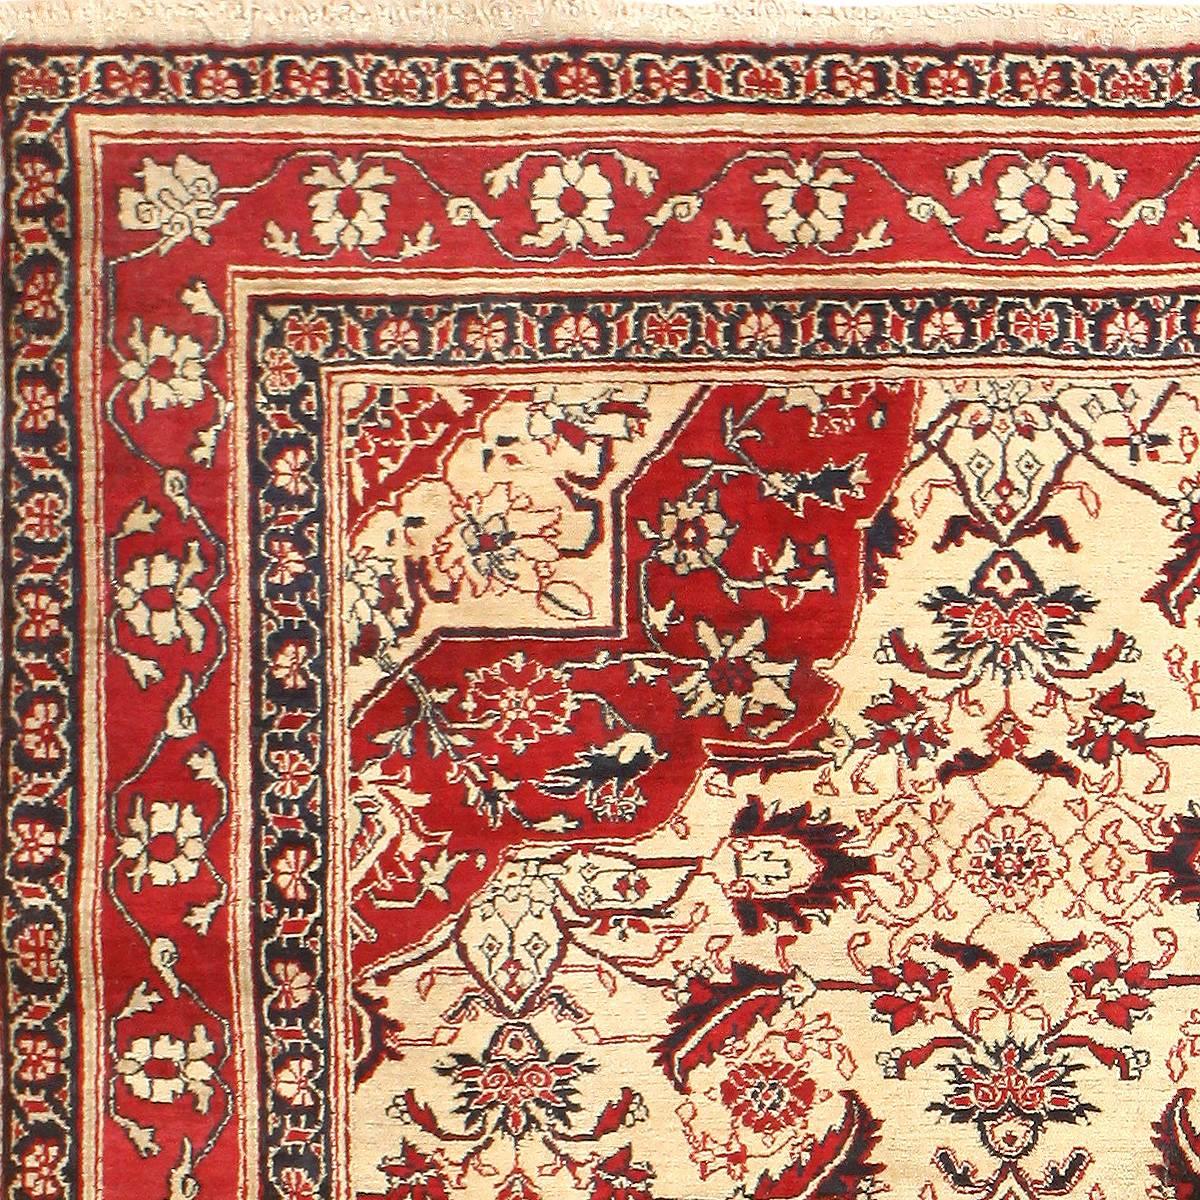 Hand-Knotted Fine Antique Indian Agra Rug. Size: 6 ft x 8 ft 9 in (1.83 m x 2.67 m)